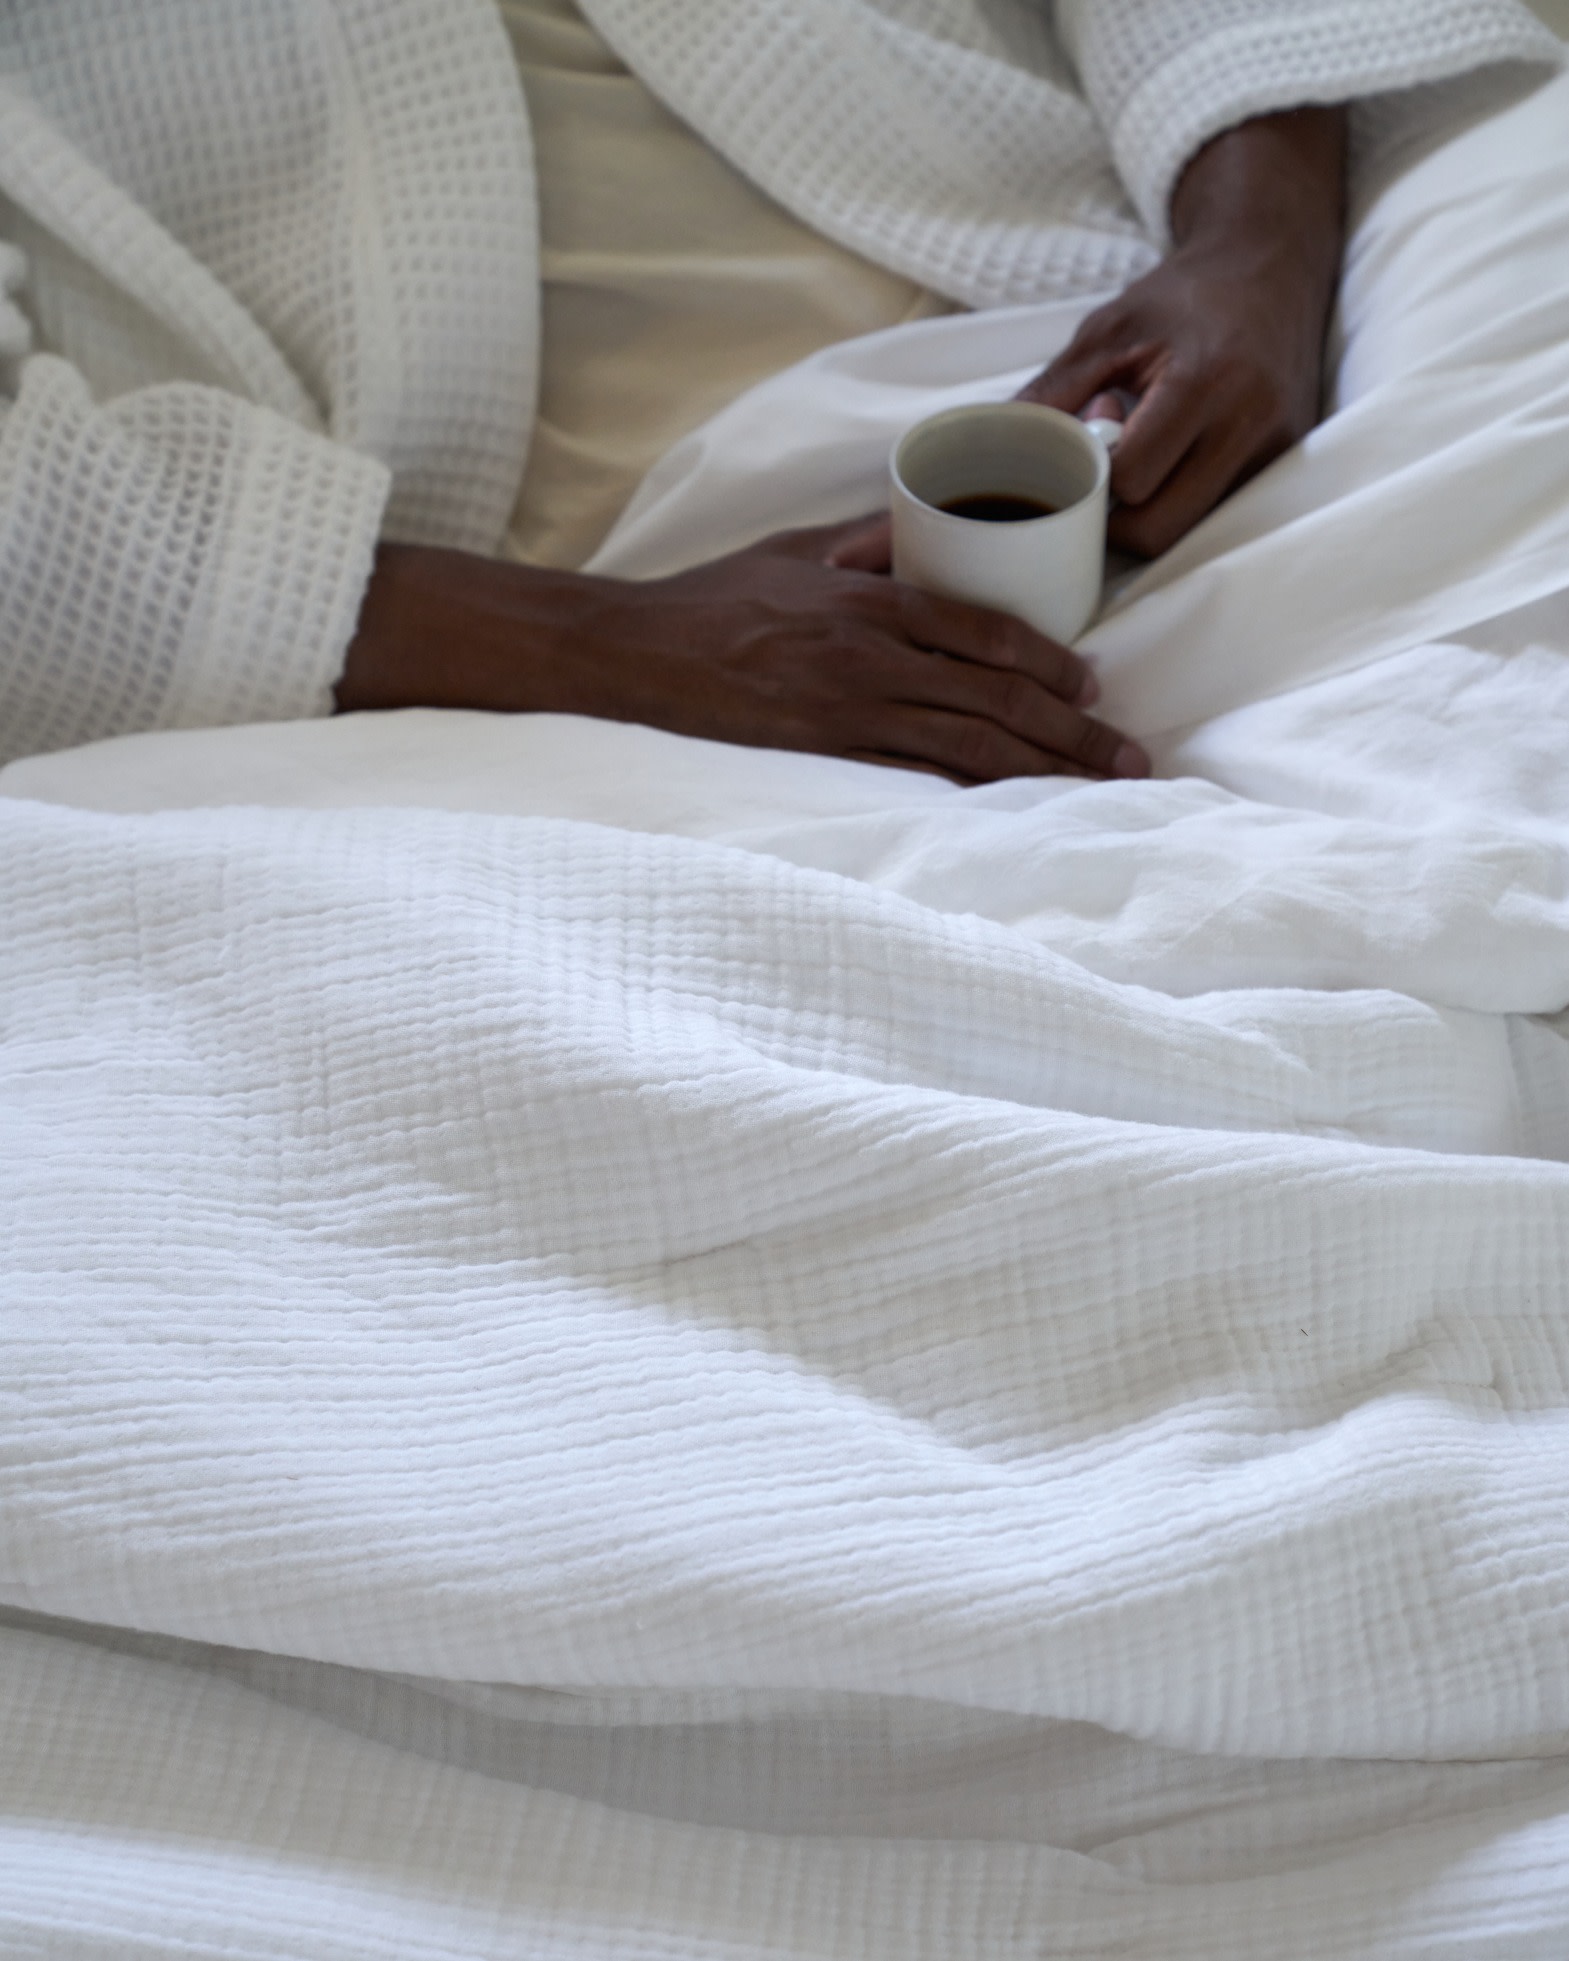 A person drinking coffee in a cozy bed with plush white bedding